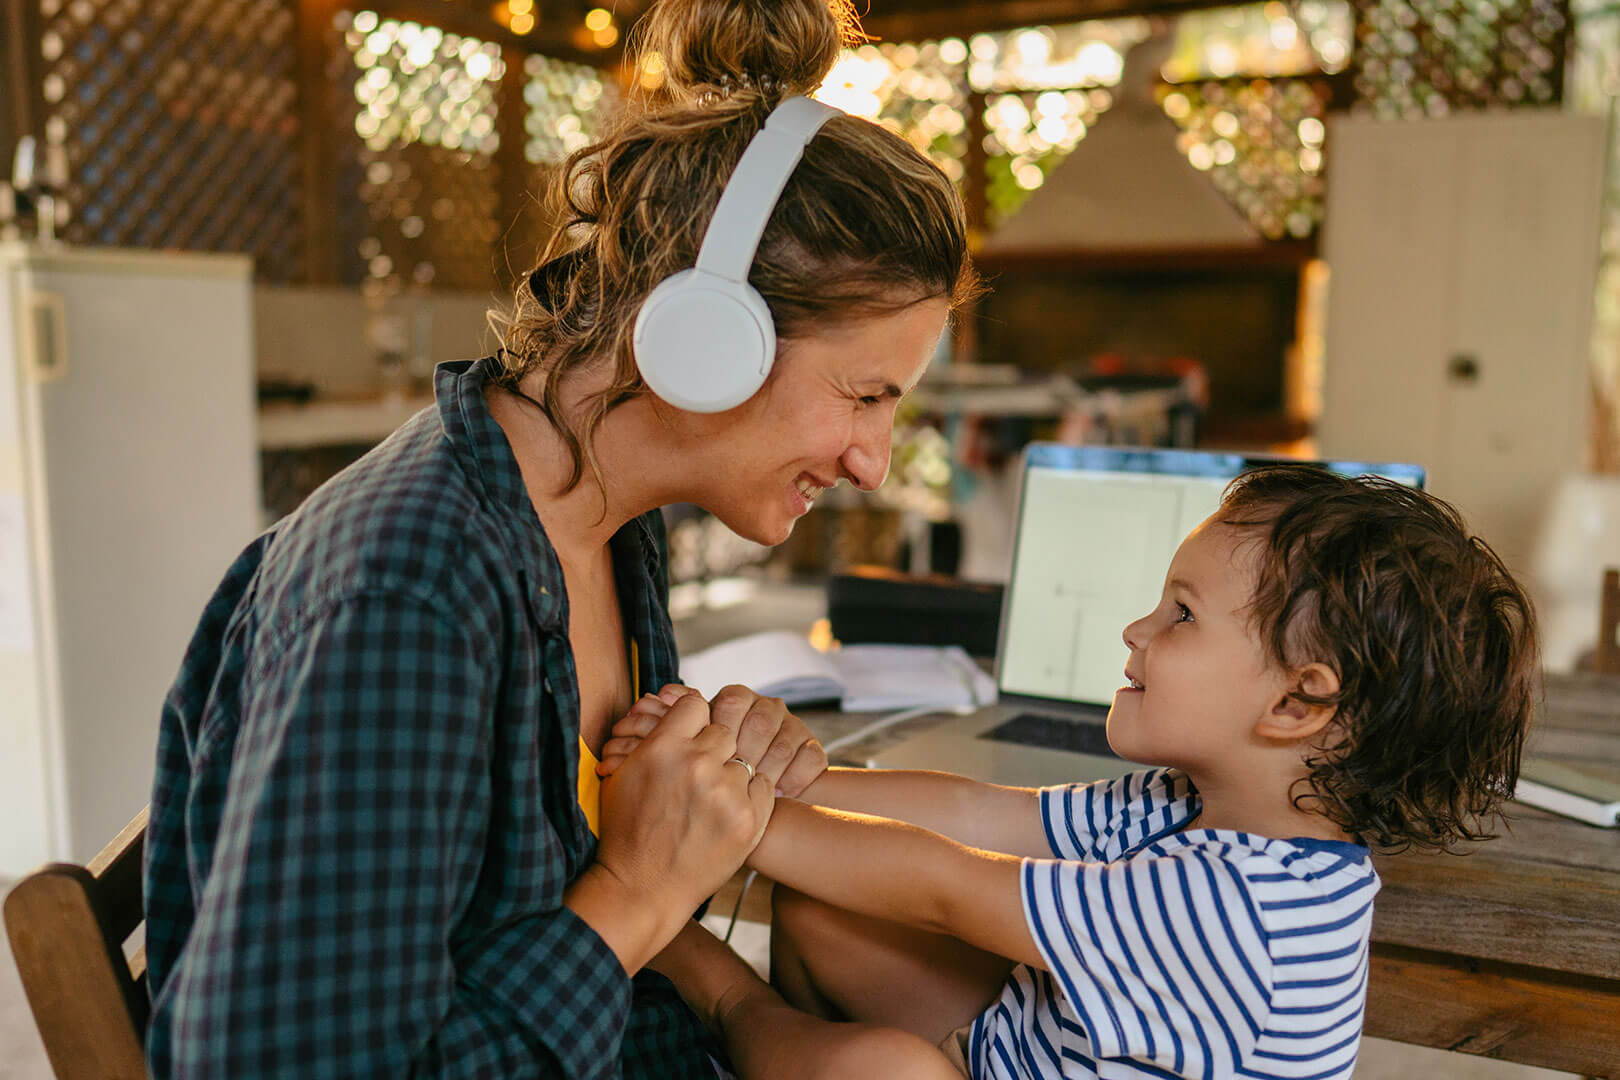 photograph of woman wearing headphones and smiling with child in lap